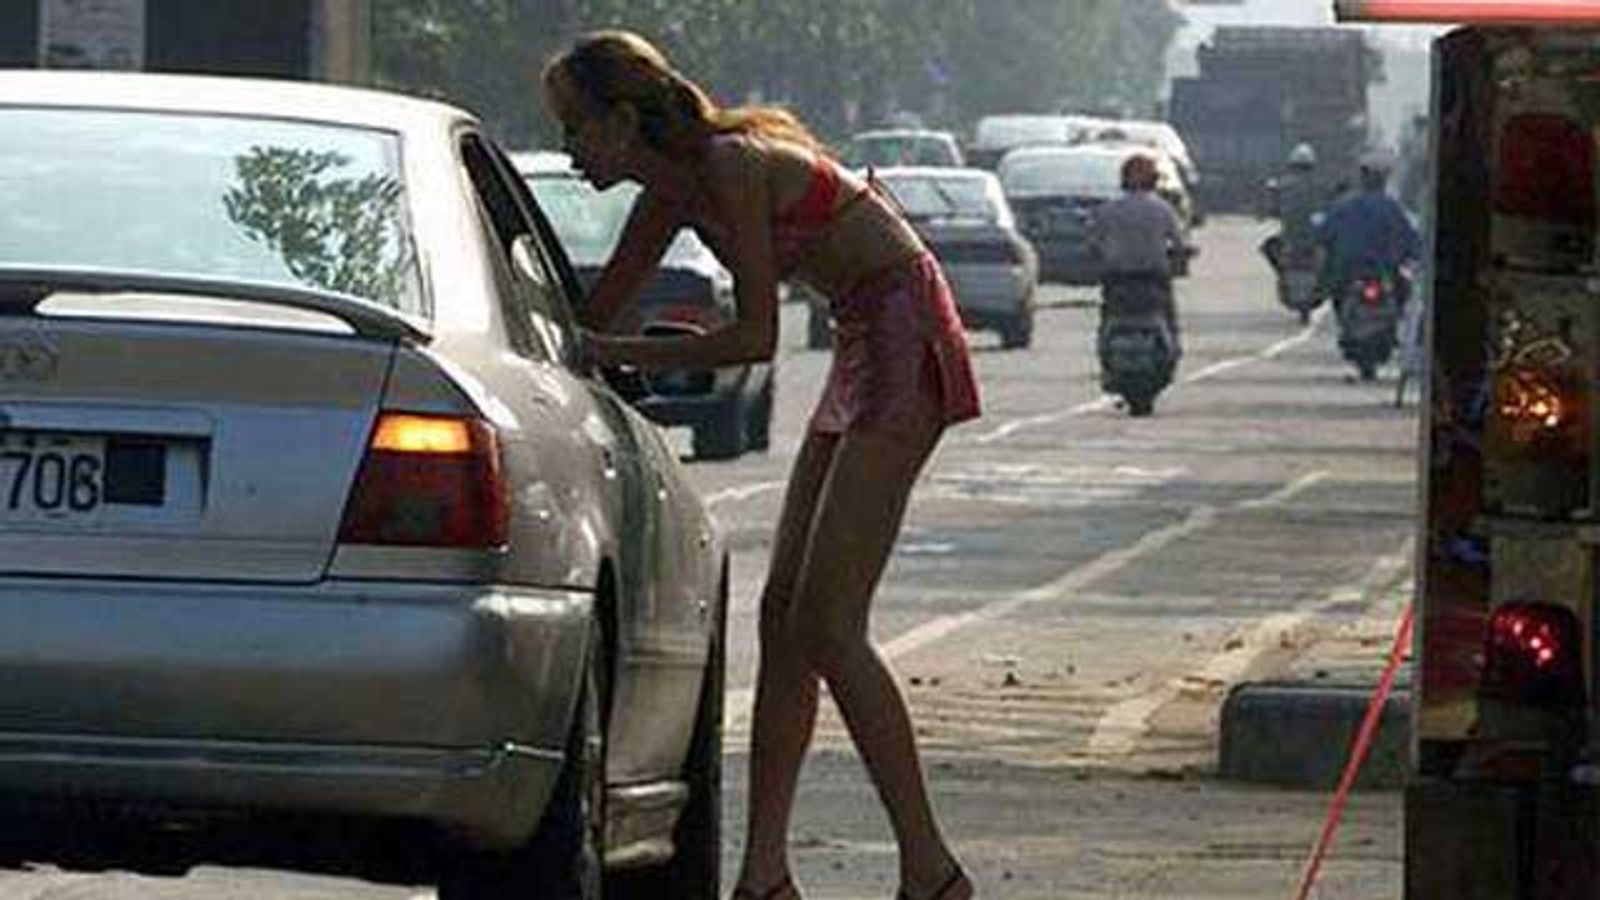 Canadian Supreme Court Voids 3 Anti-Prostitution Laws